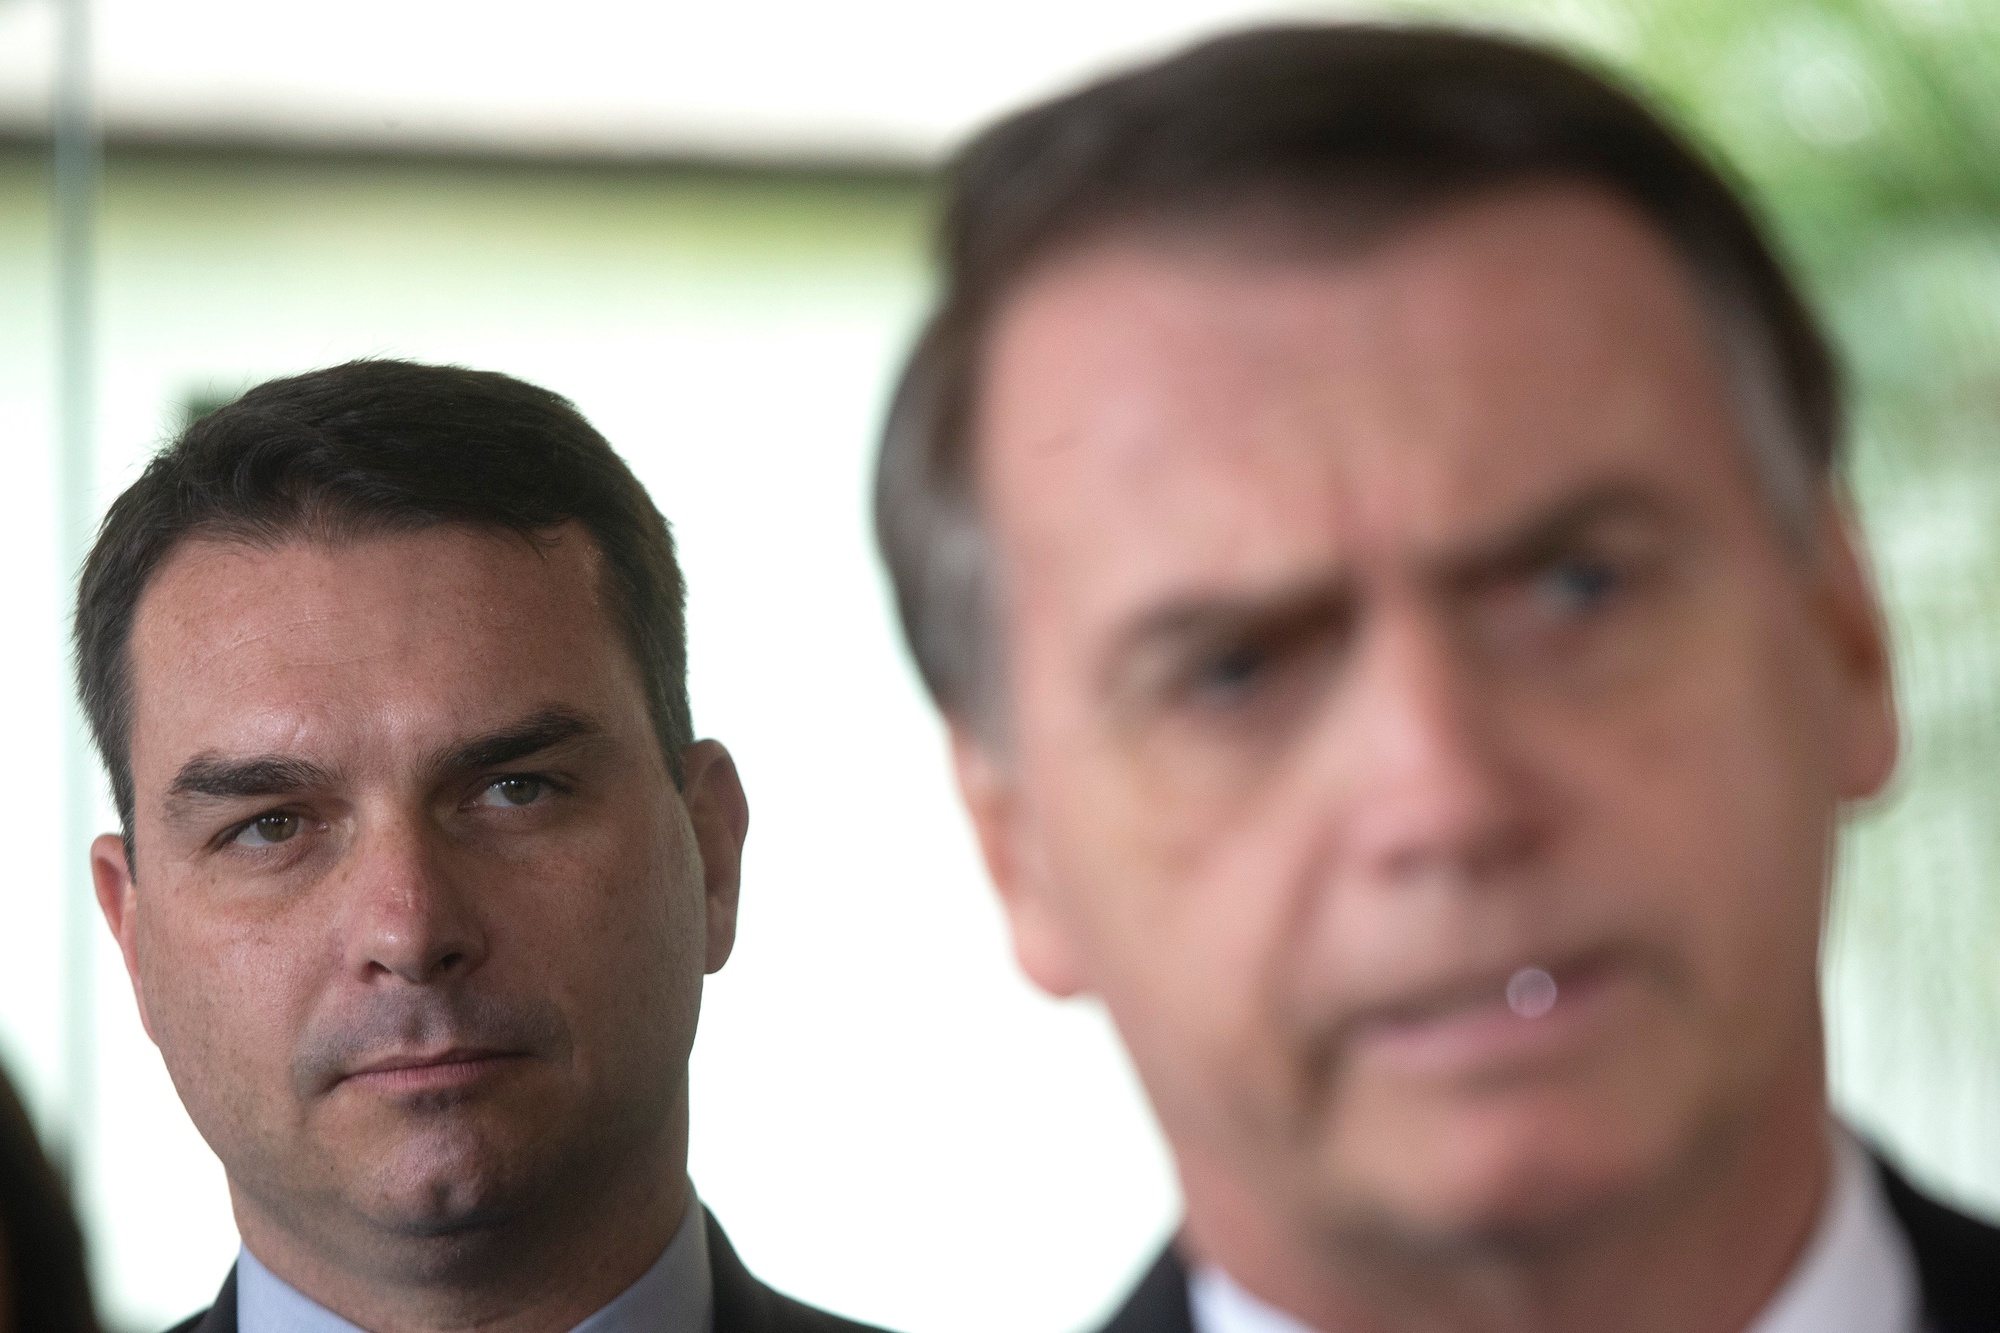 epa08628612 (FILE) - Then Brazilian President-elect Jair Bolsonaro (R) and his son, then elected senator Flavio Bolsonaro (L), arrive at the Supreme Court of Justice for a press conference in Brasilia, Brazil, 07 November 2018 (reissued 27 August 2020). According to the senator&#039;s office statement, the eldest son of Brazilian President Jair Bolsonaro, Senator Flavio Bolsonaro, said he has tested positive for the new coronavirus.  EPA/Joedson Alves *** Local Caption *** 54757503